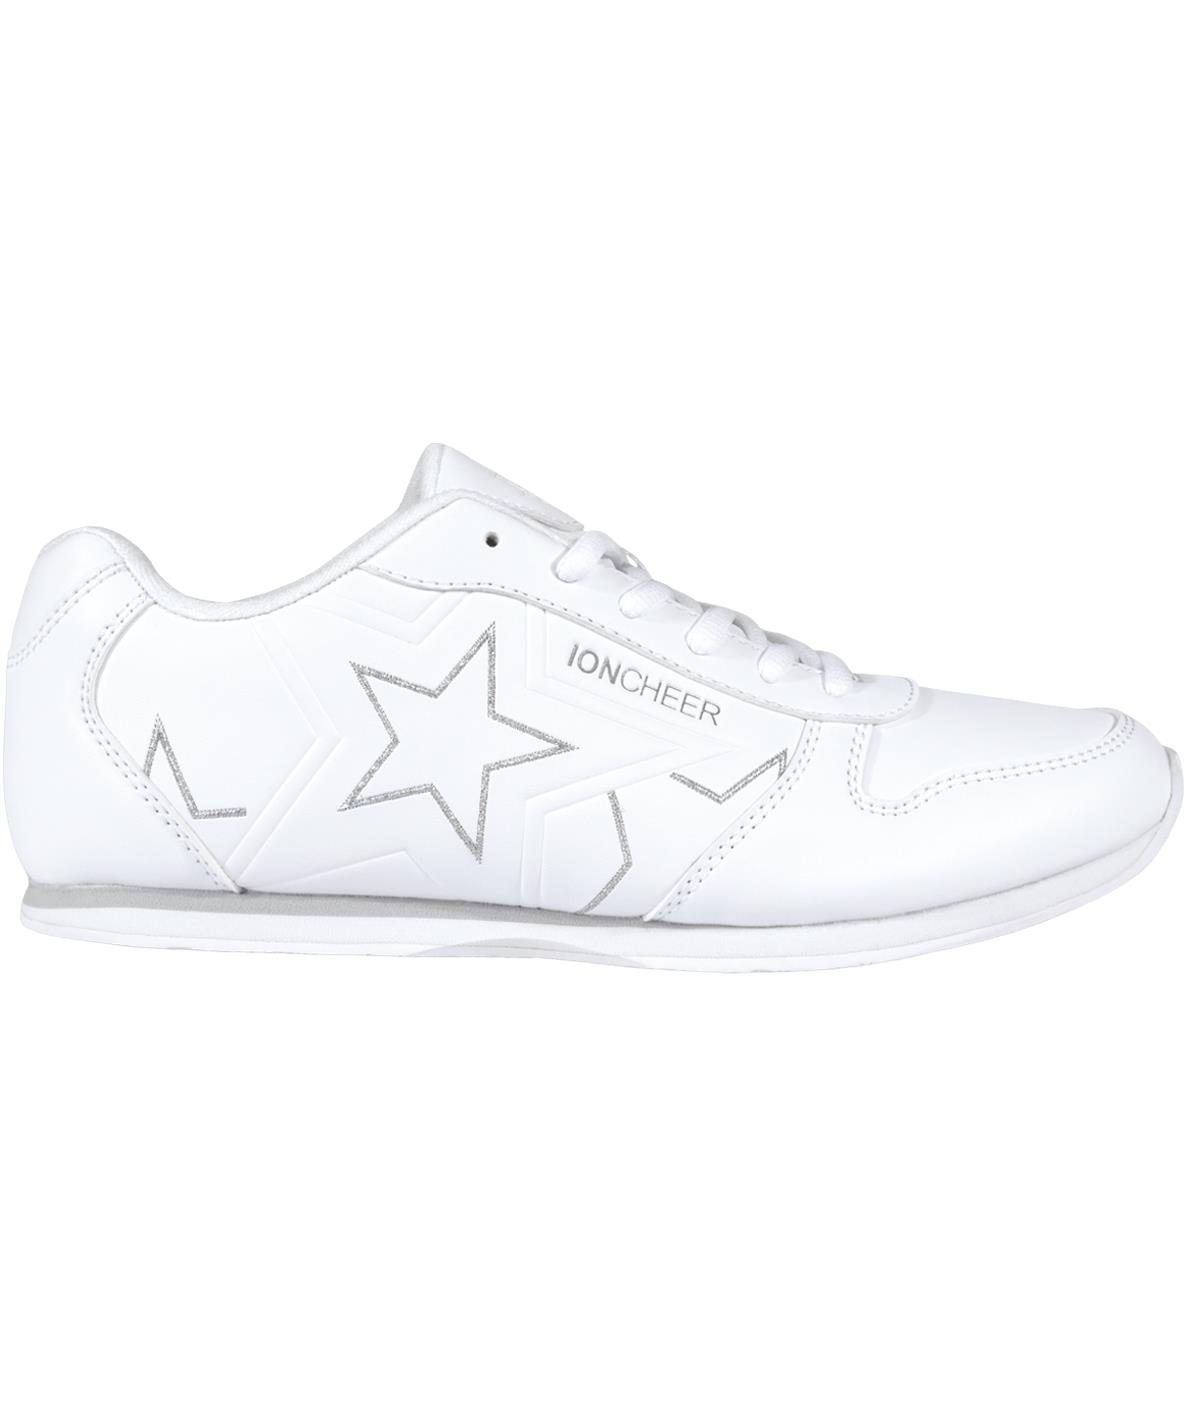 payless shoes cheer shoes